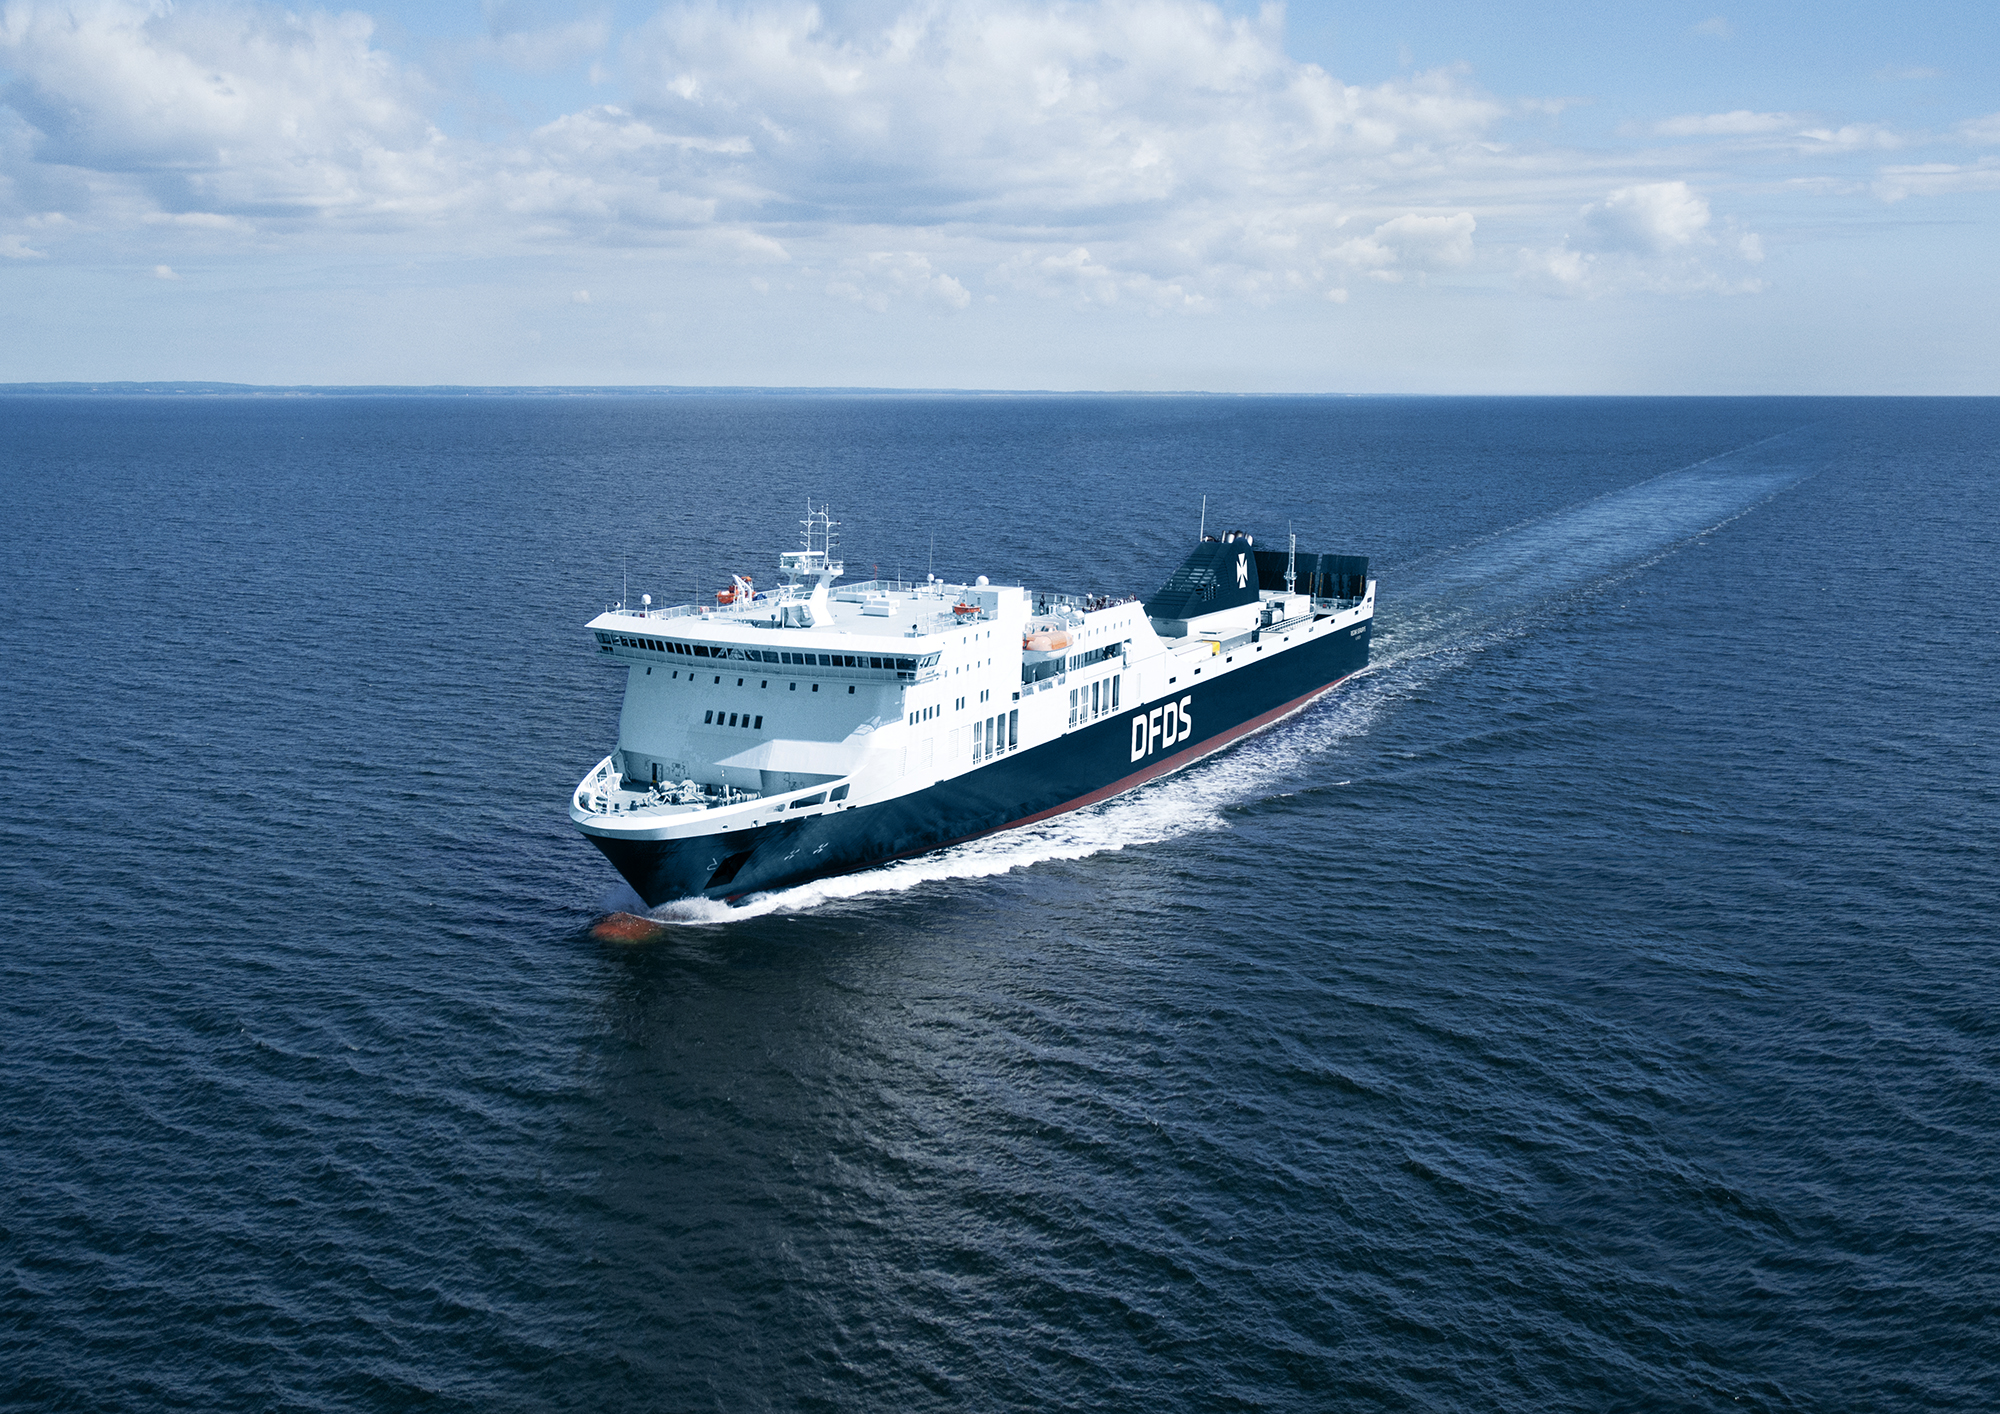 DFDS vessel on the Rosslare Dunkerque route